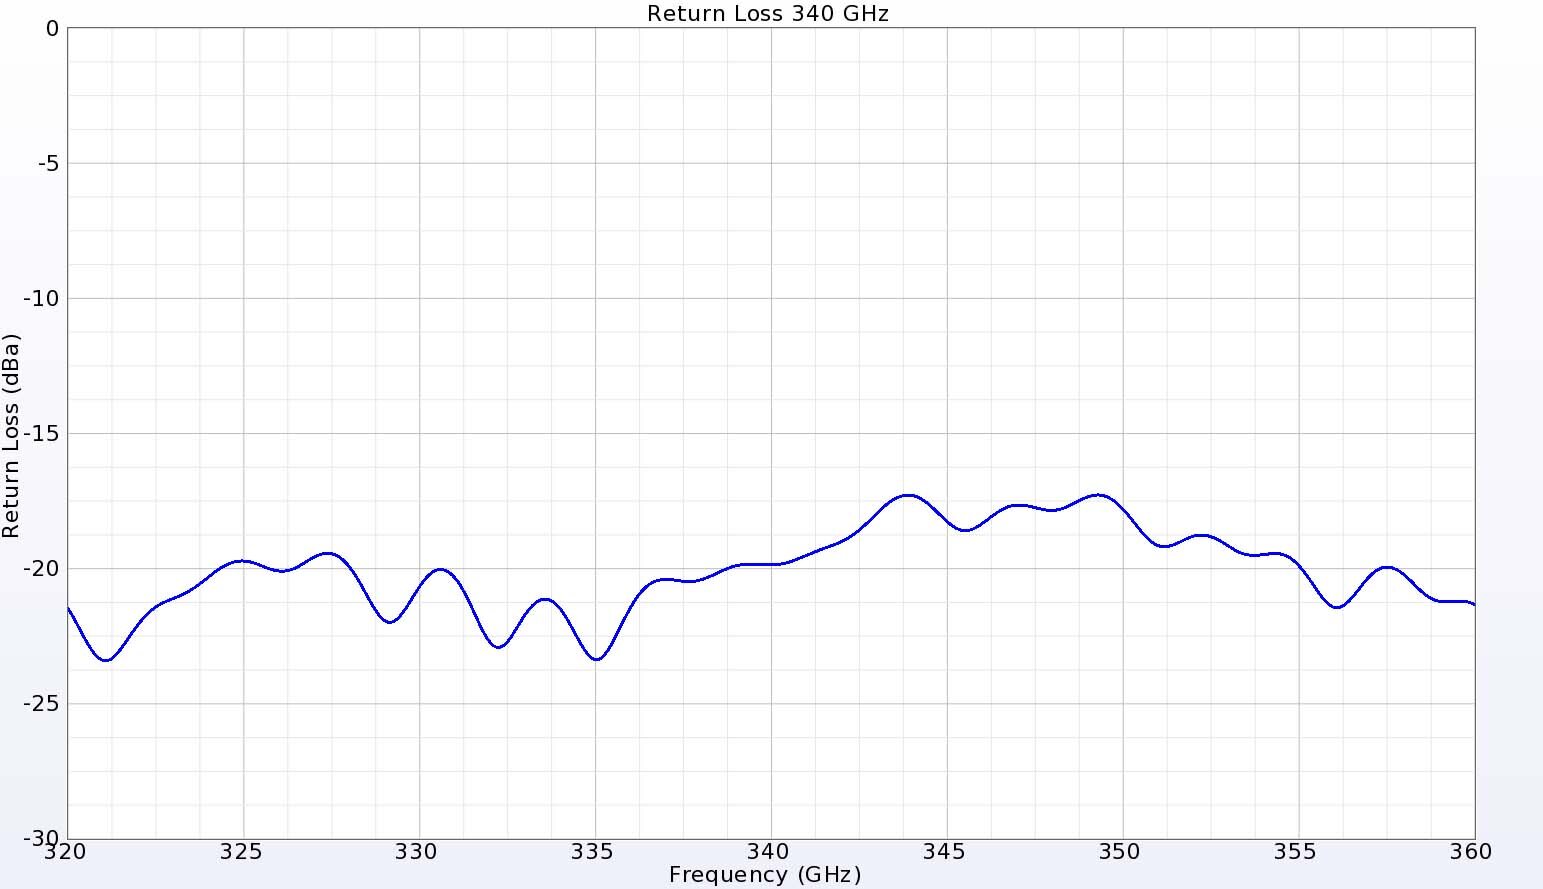 Figure 5:  At 340 GHz, the return loss is nearly -20 dB for the high band port.